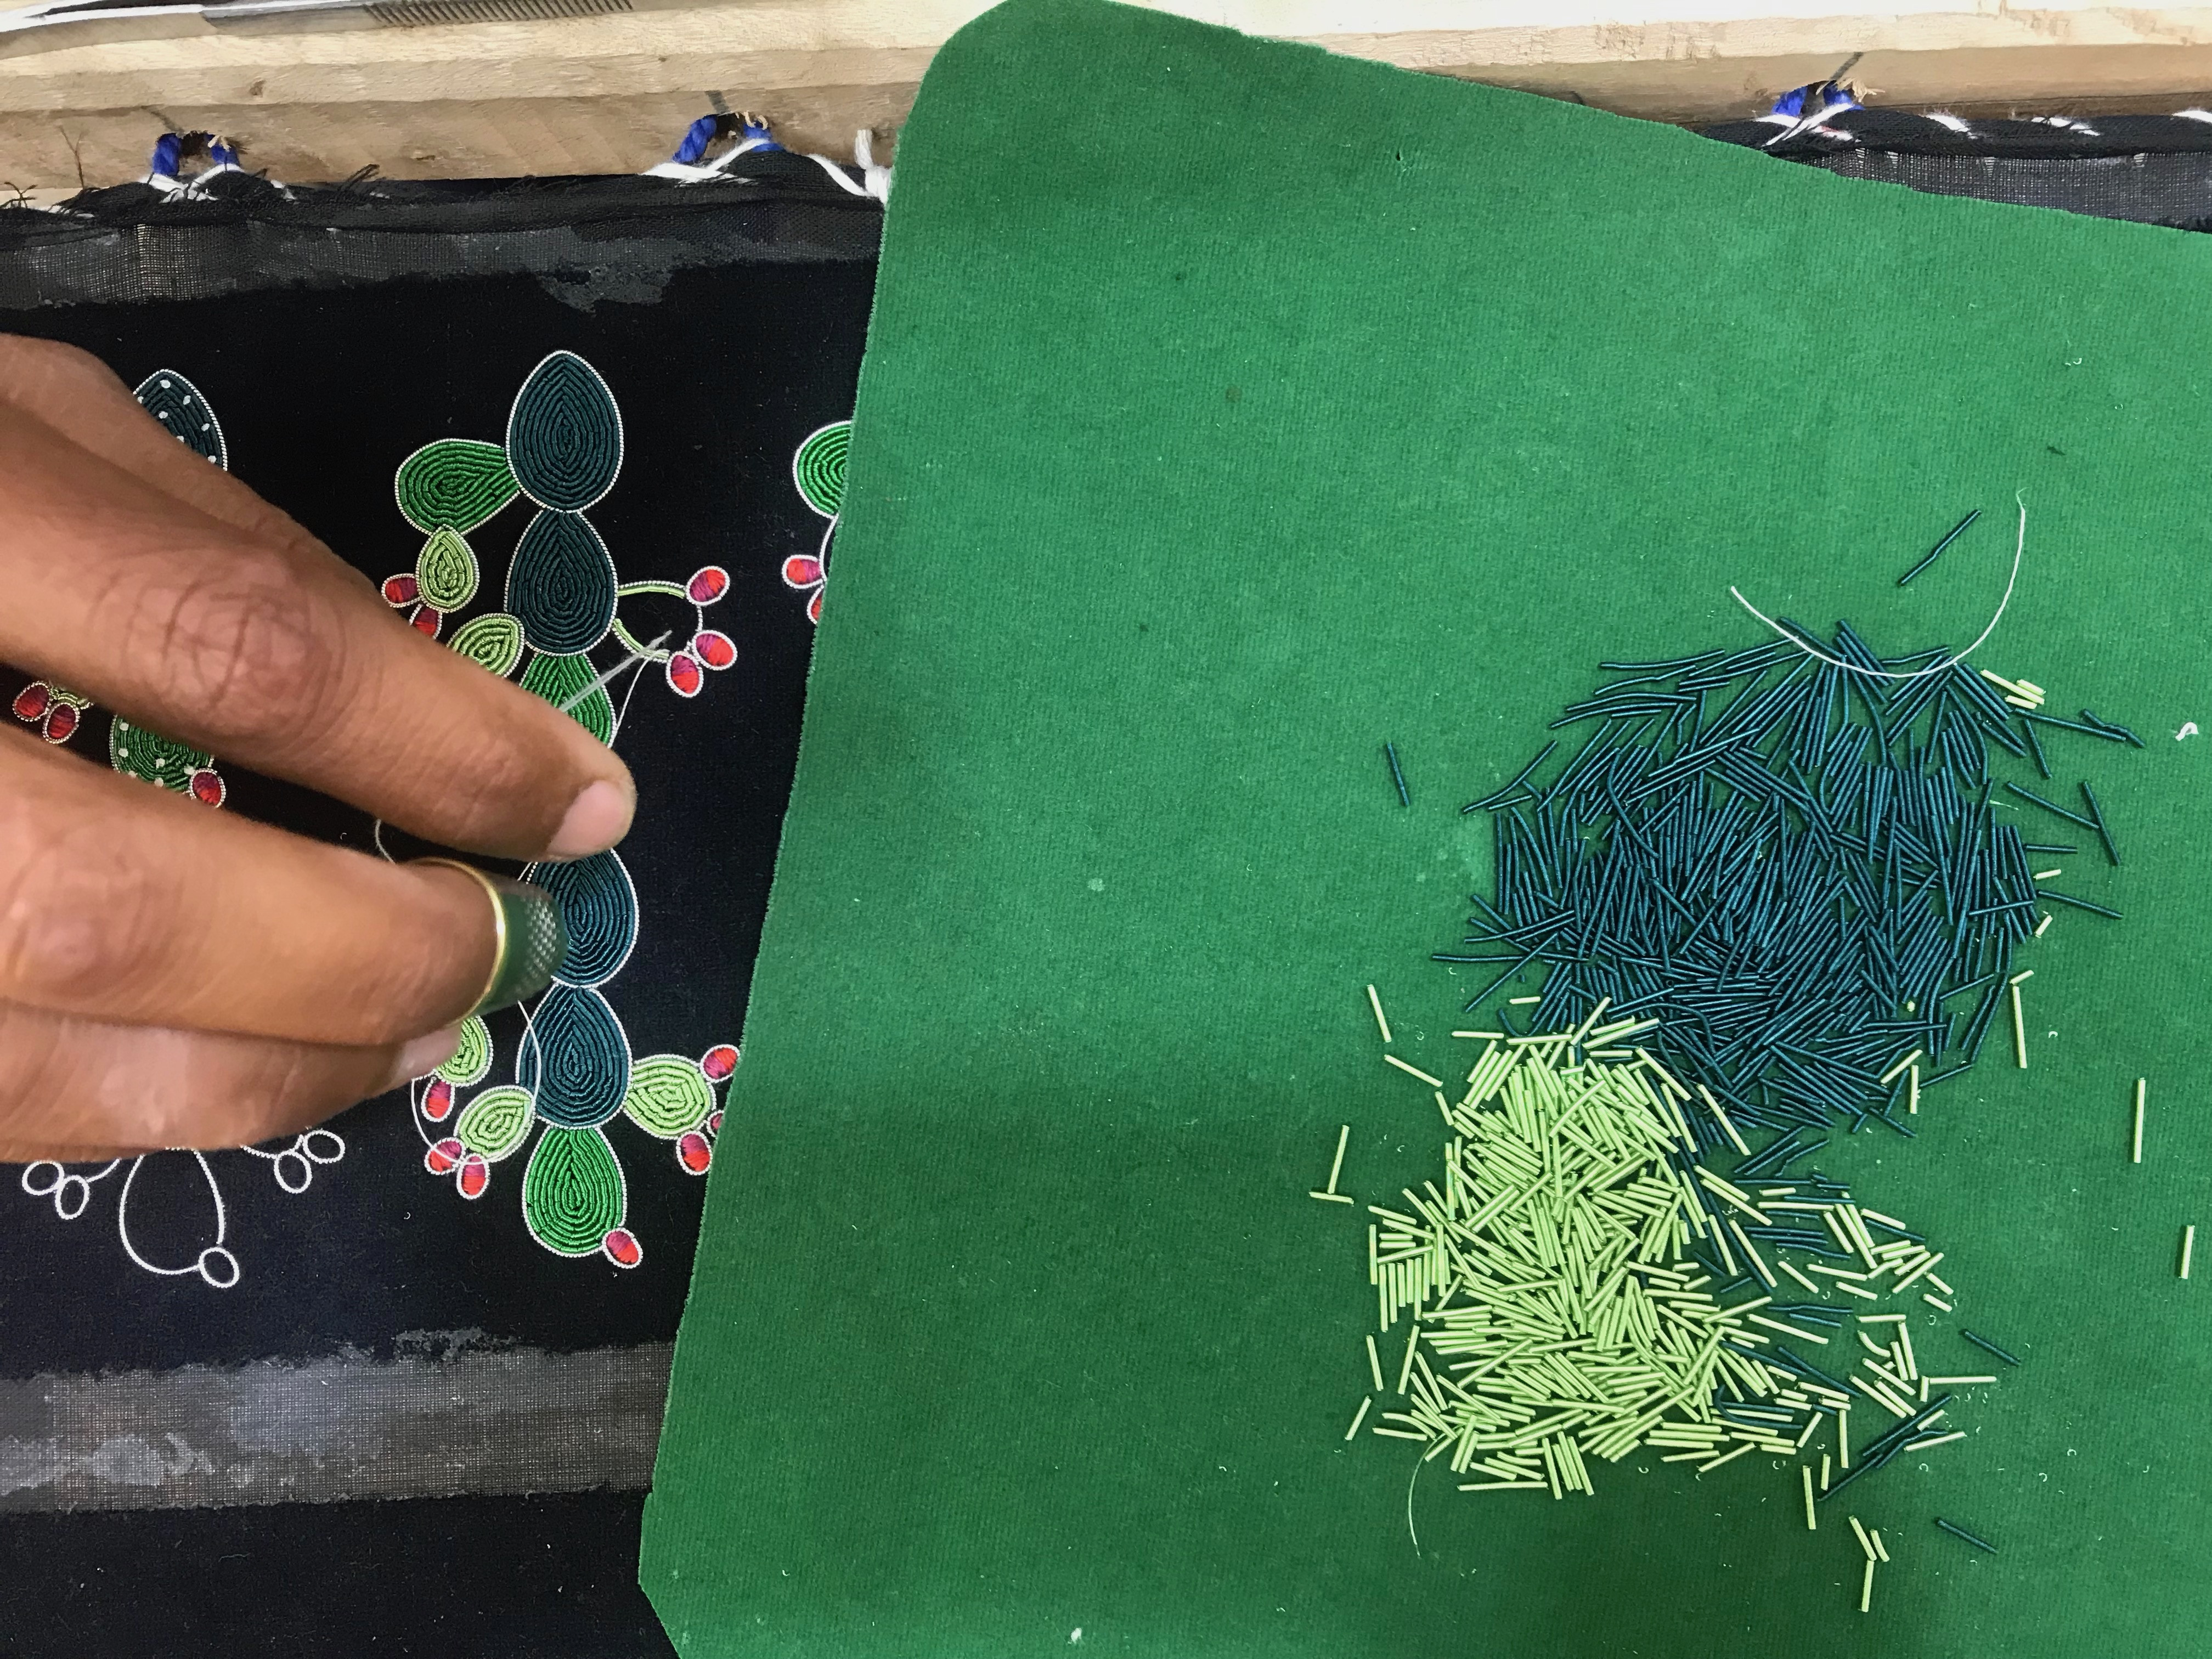 CANNETILLA IN PAKISTAN: The manufacture of embroidered jewellery